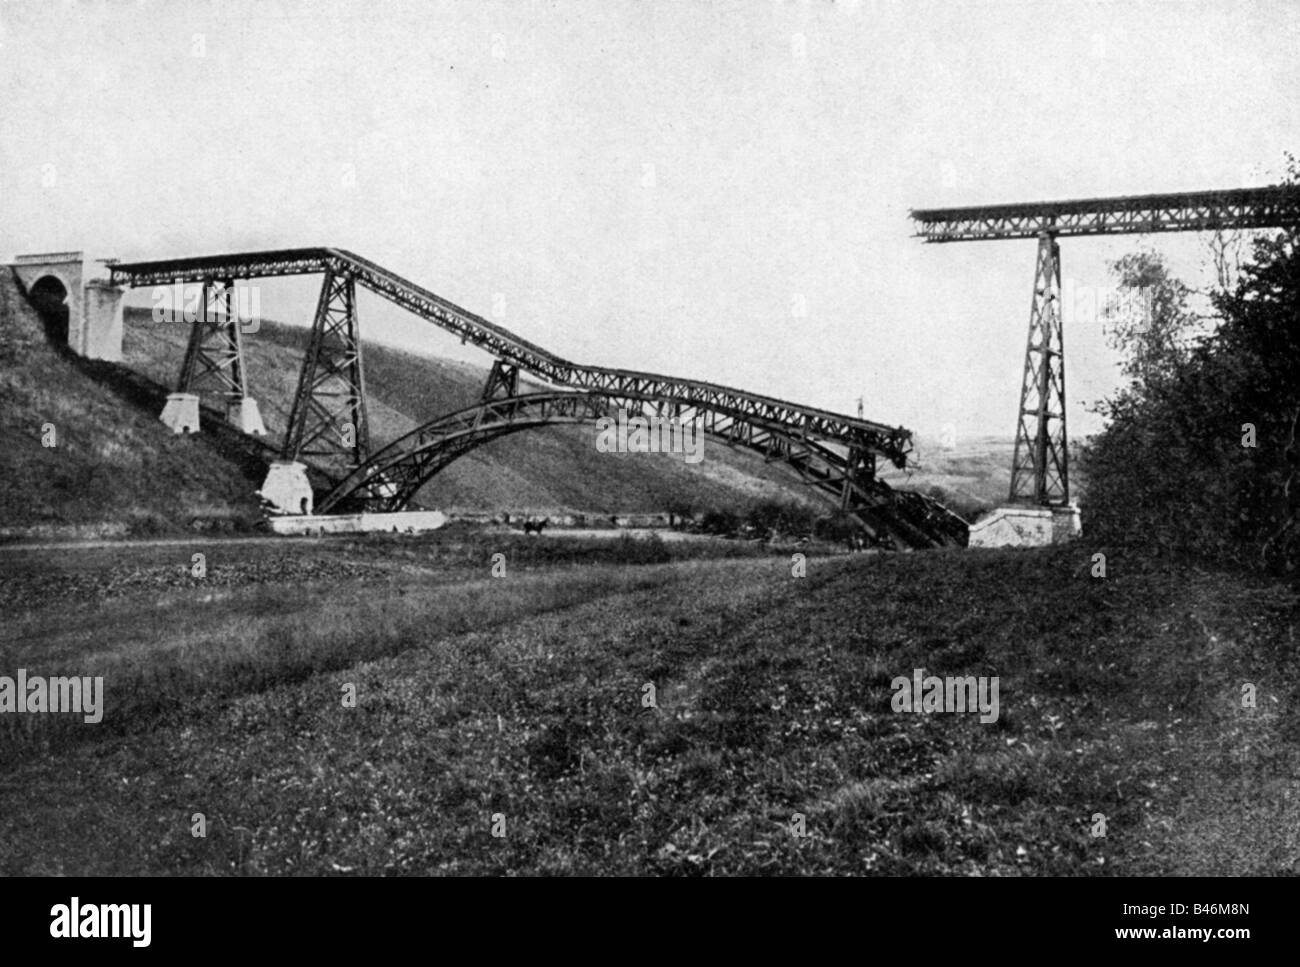 events, First World War / WWI, Western Front, advance of the German troops near Metz, railway bridge blown up by the French, France, August 1914, Stock Photo